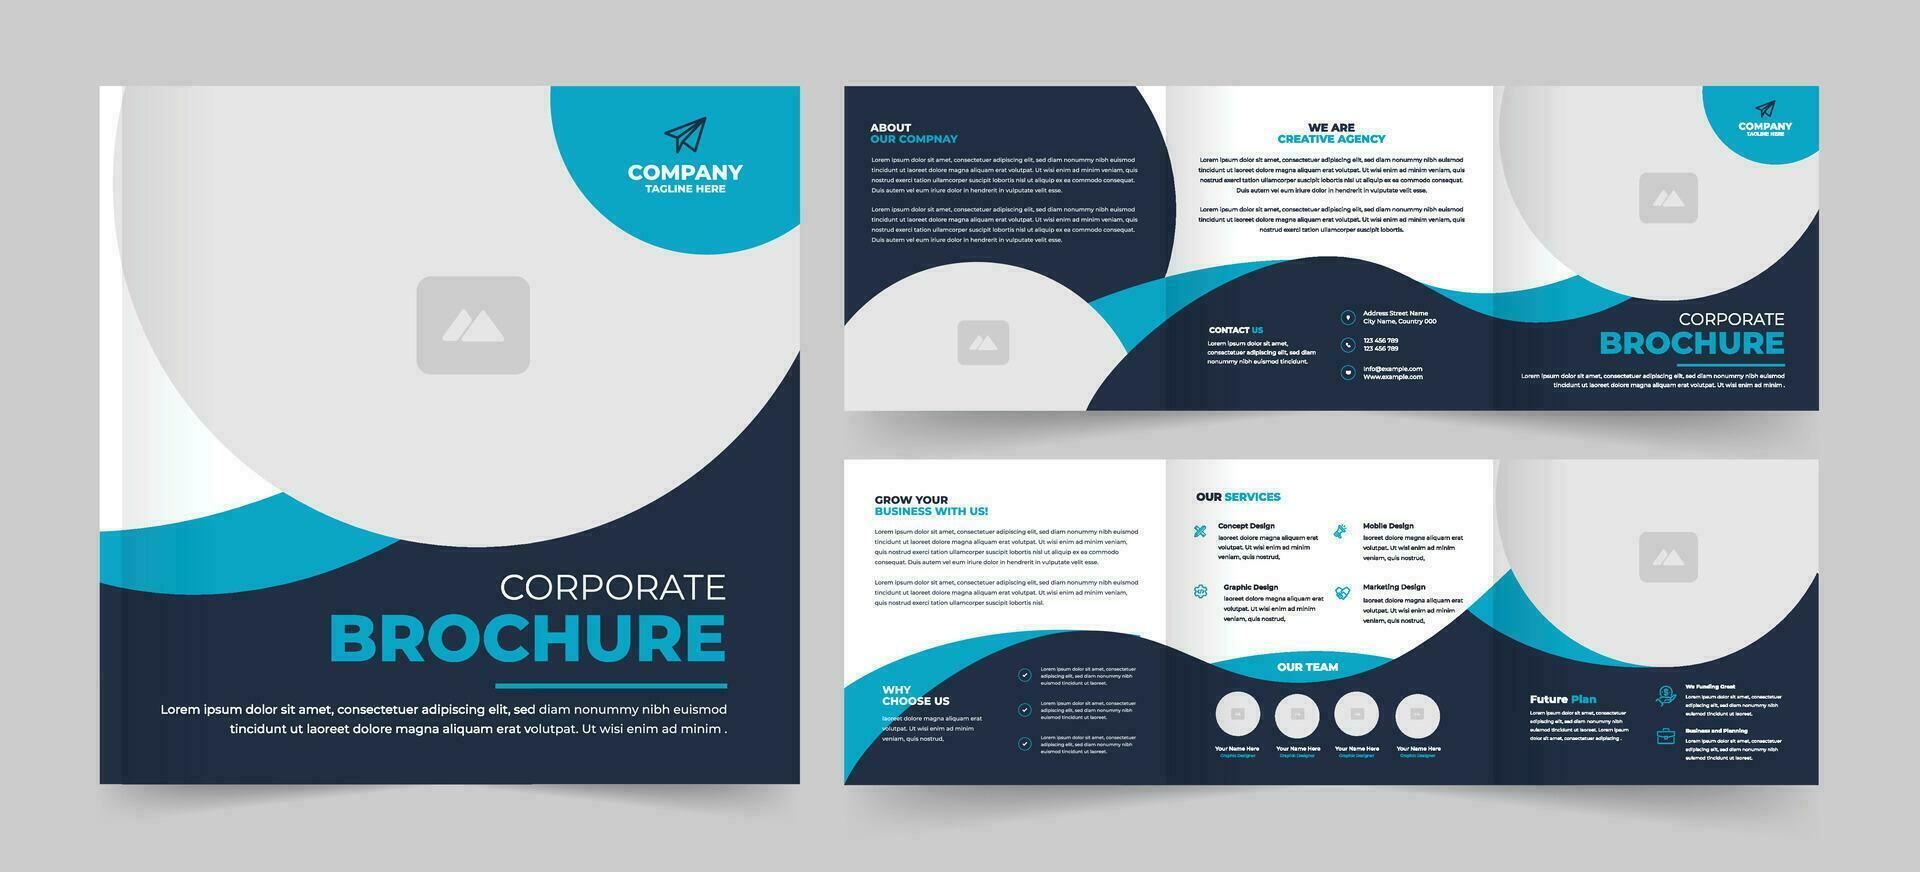 Square covers design templates for trifold brochure, flyer, cover design, book, brochure cover, Square trifold brochure design template vector